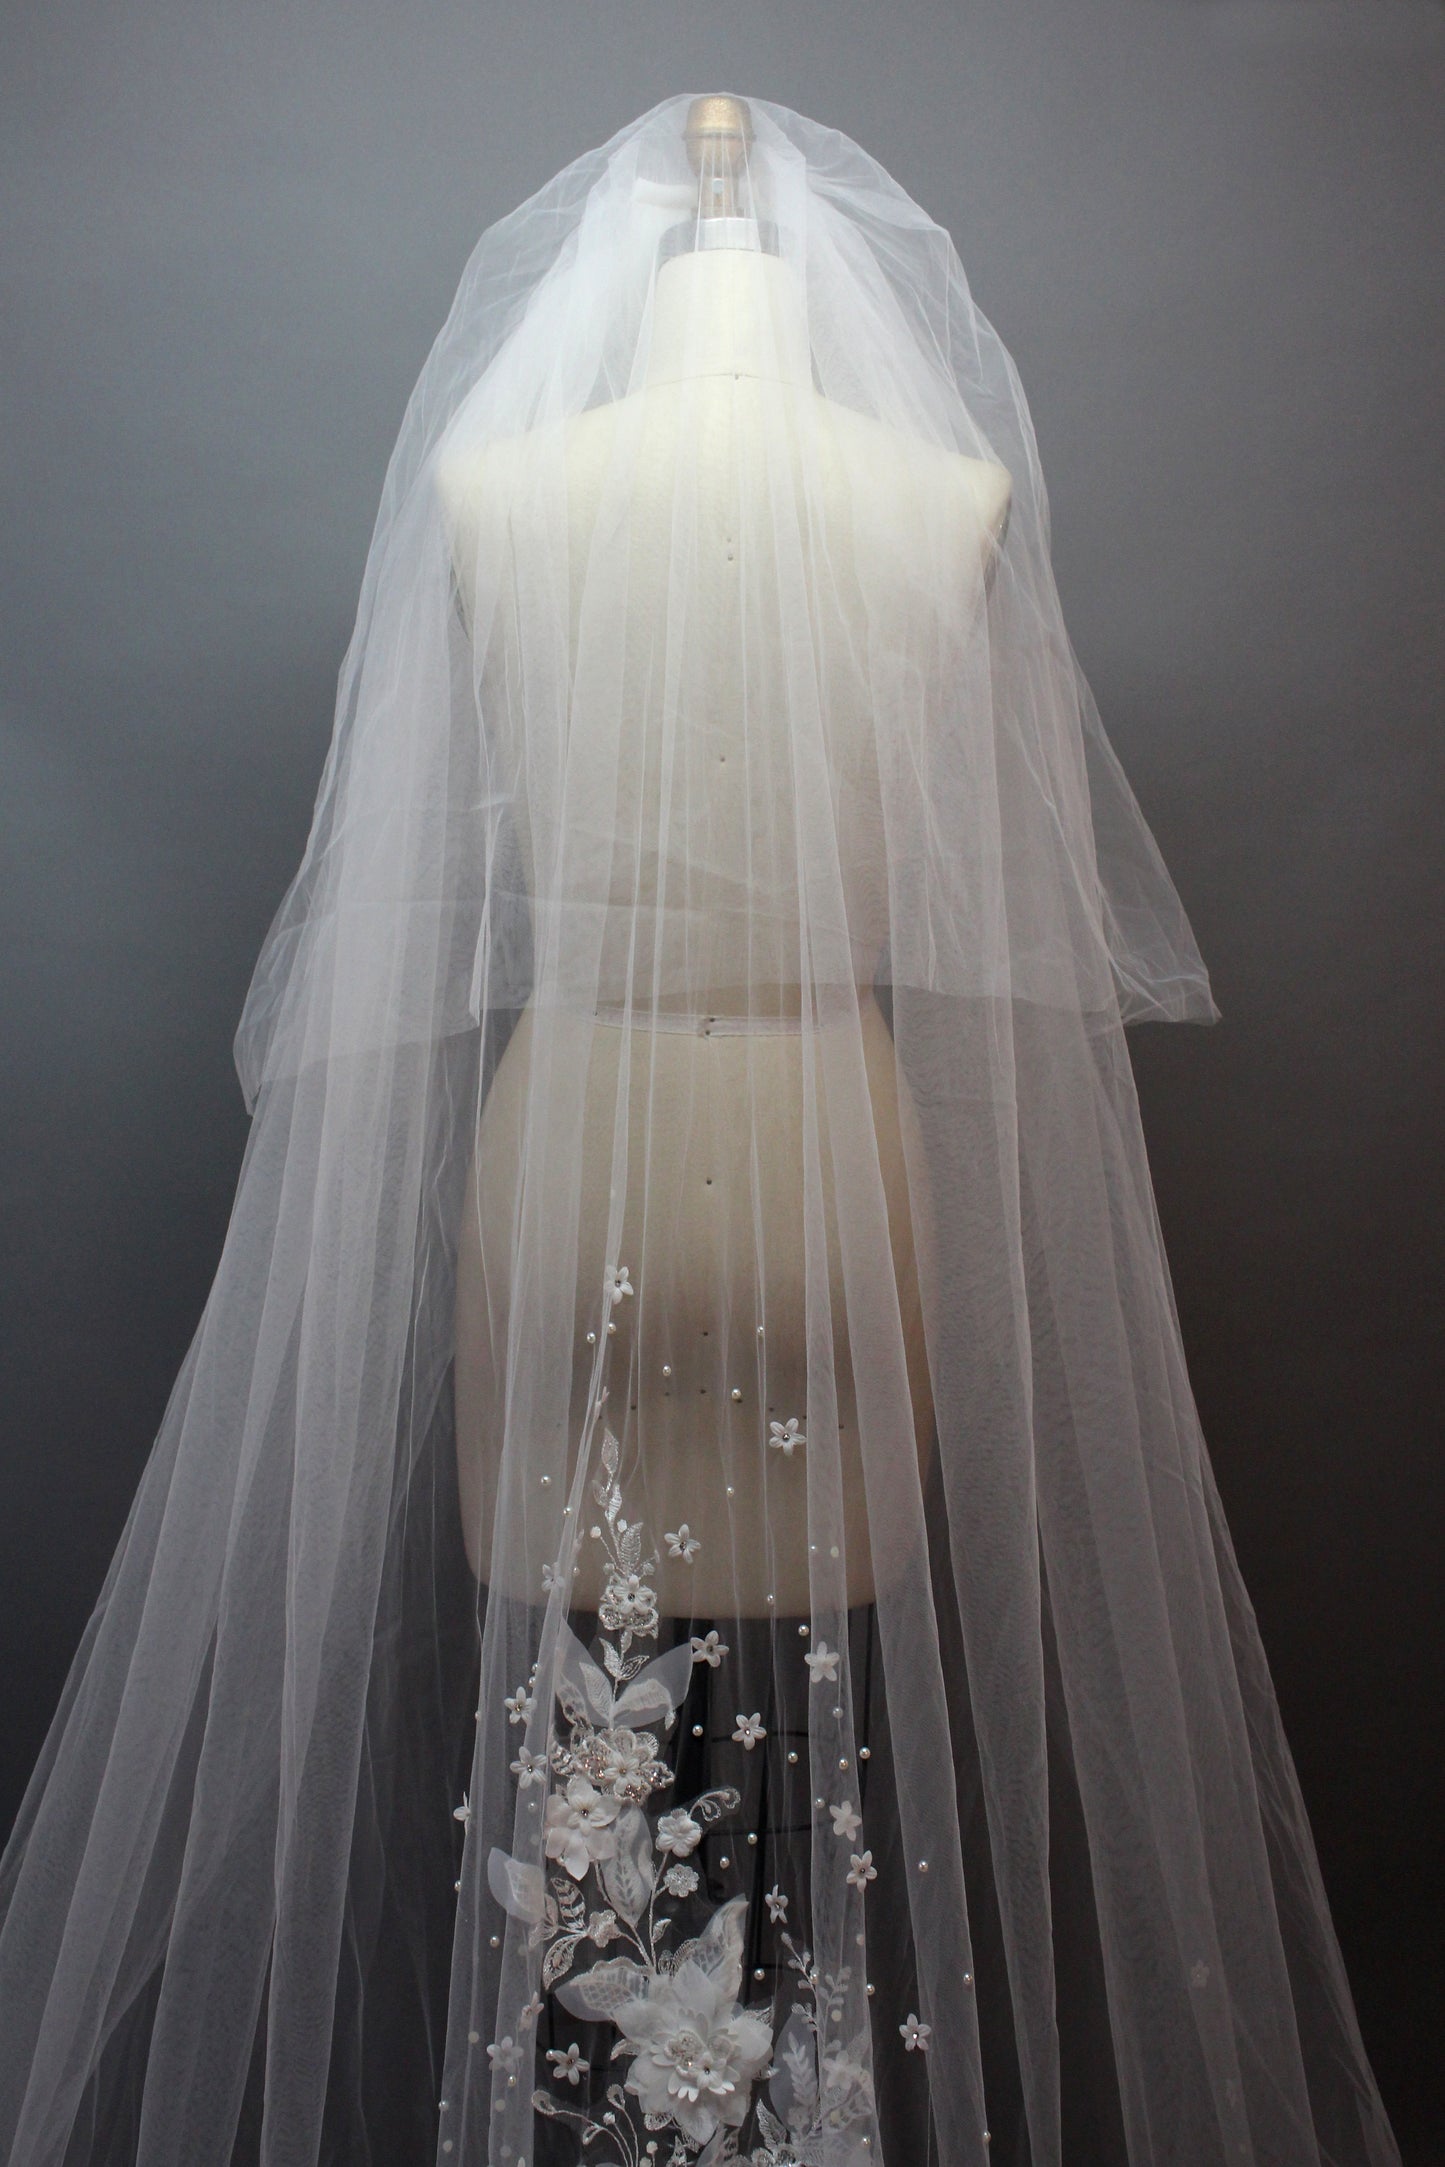 Enchanting Lace Veil - Adding Romance and Elegance to Your Wedding T046